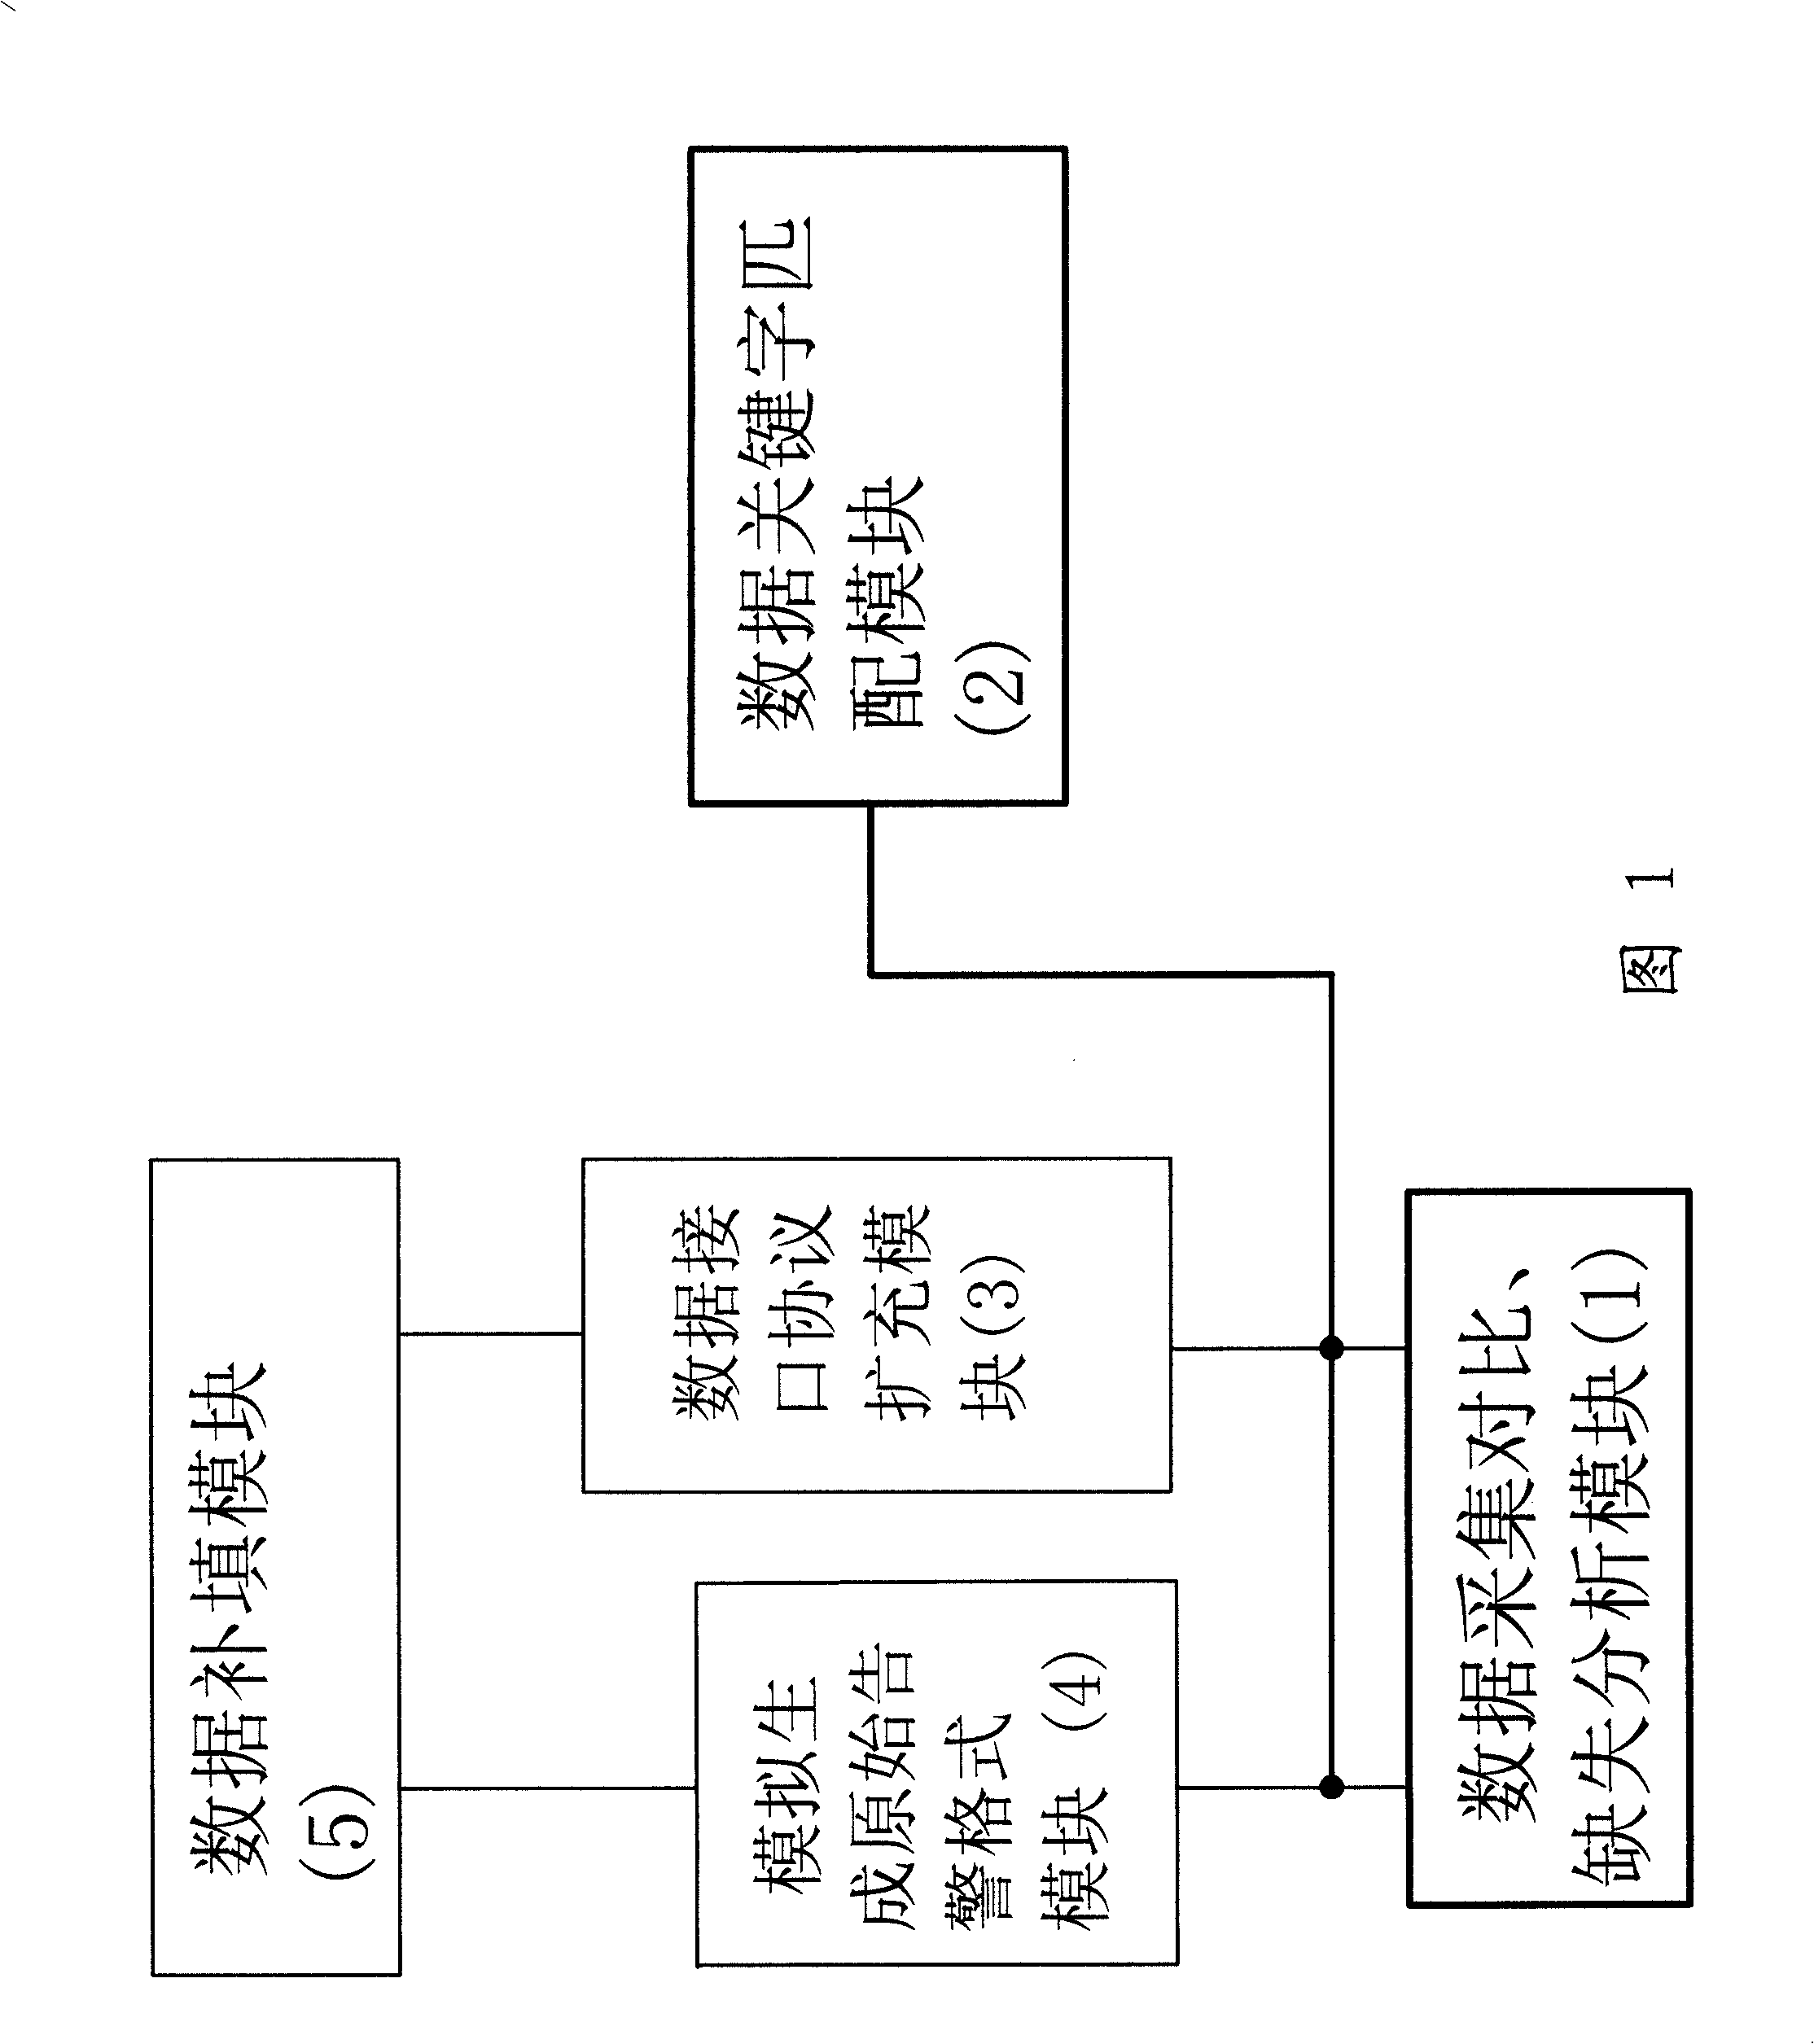 North direction interface data dynamic comparison supplement system